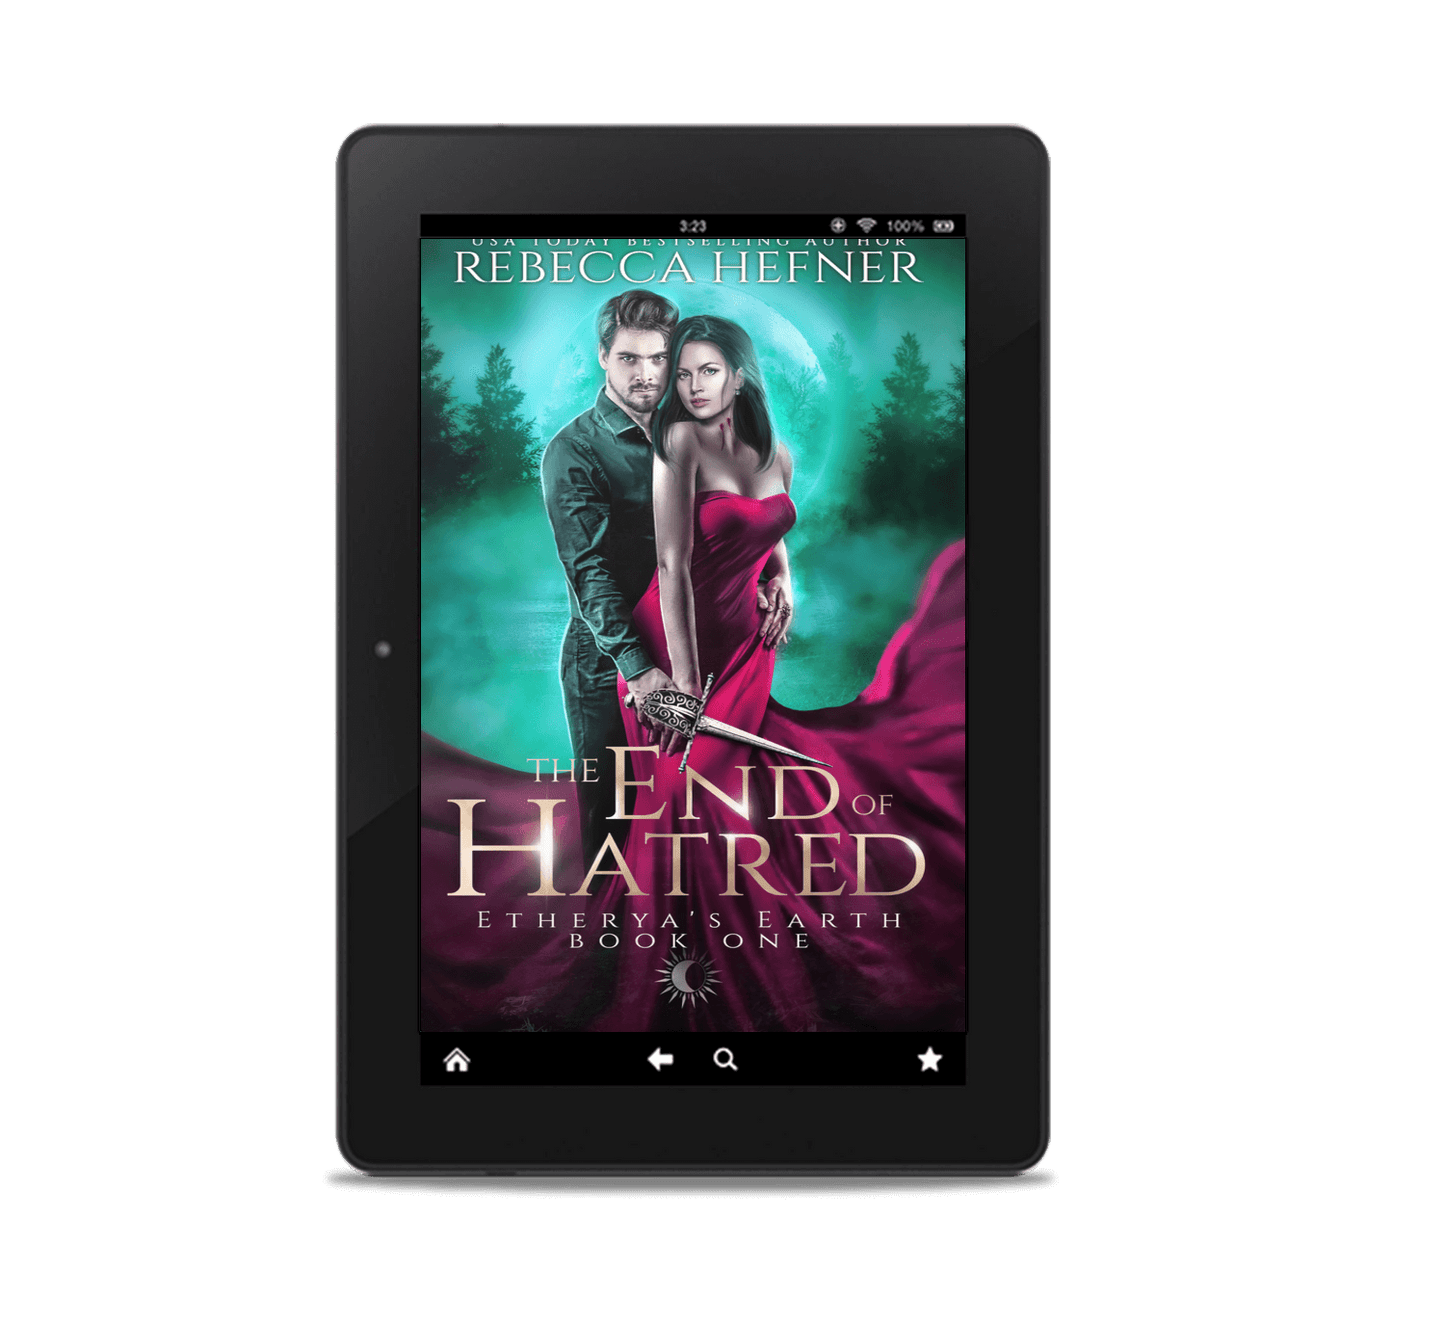 The End of Hatred (Etherya's Earth #1)